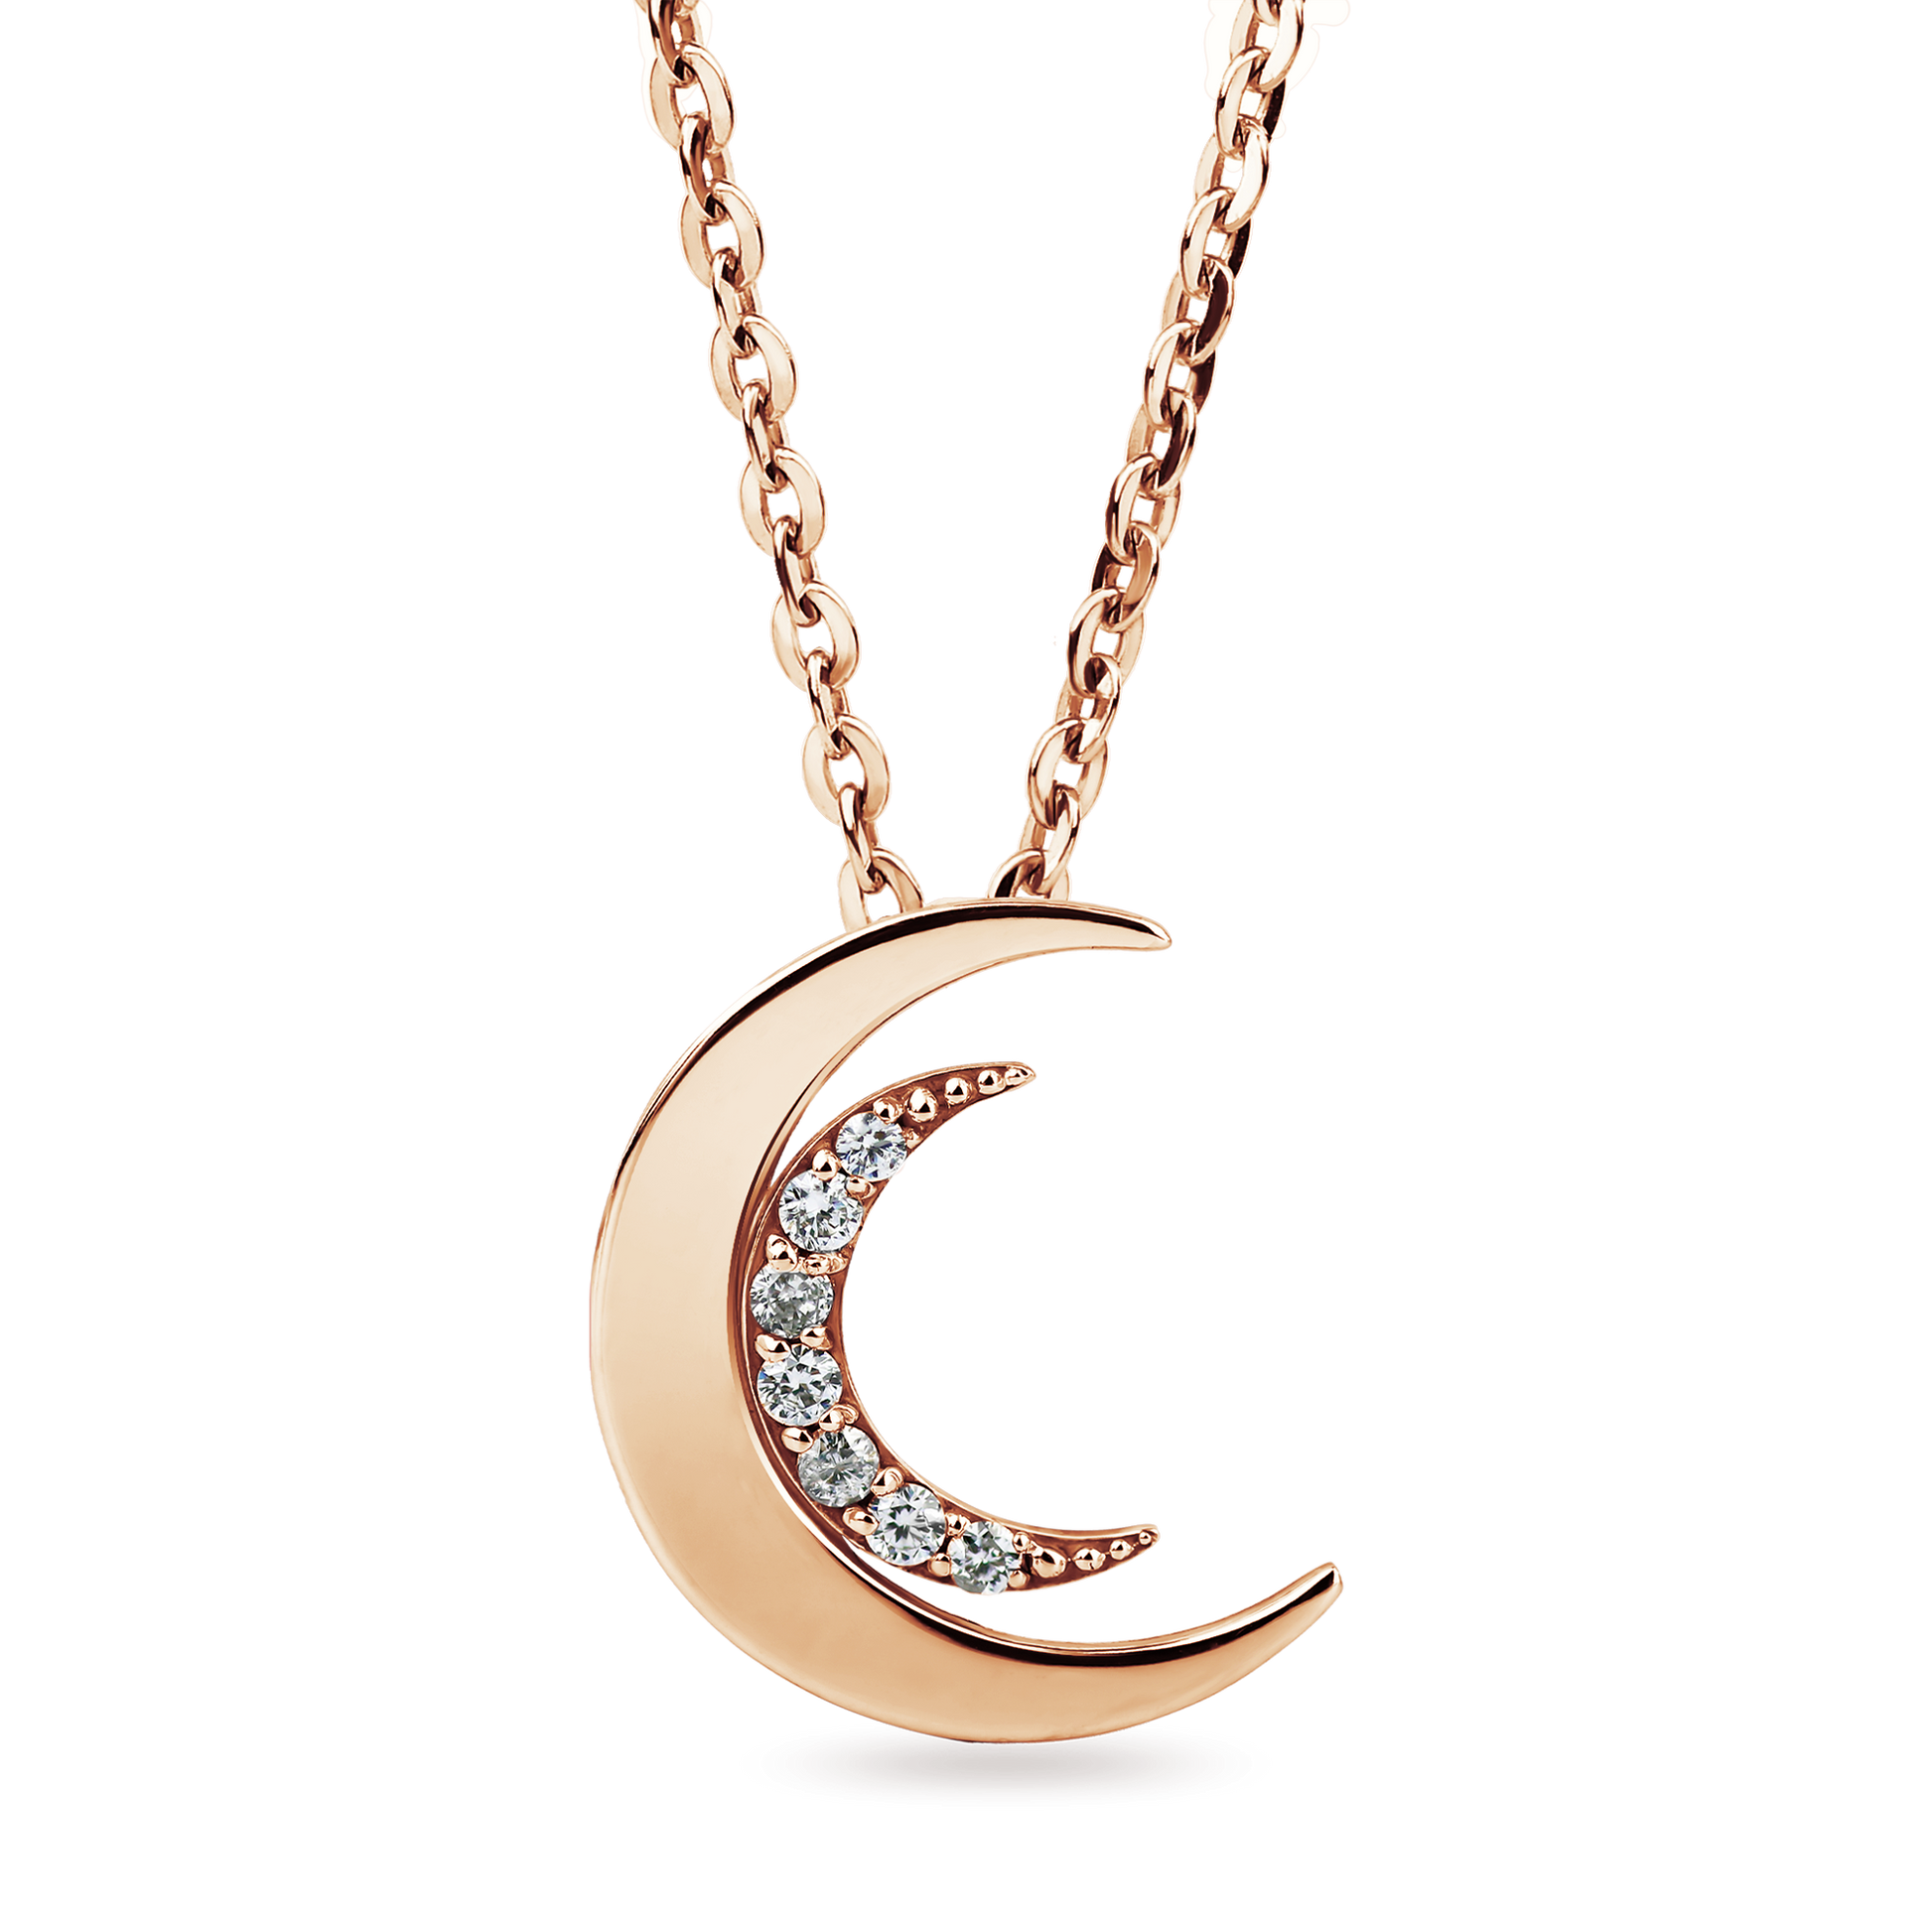 SENYDA TWINKLE - GOLD DIAMOND DOUBLE MOON WITH THE SAME FRONT AND BACK SILE NECKLACE Senyda Jewels